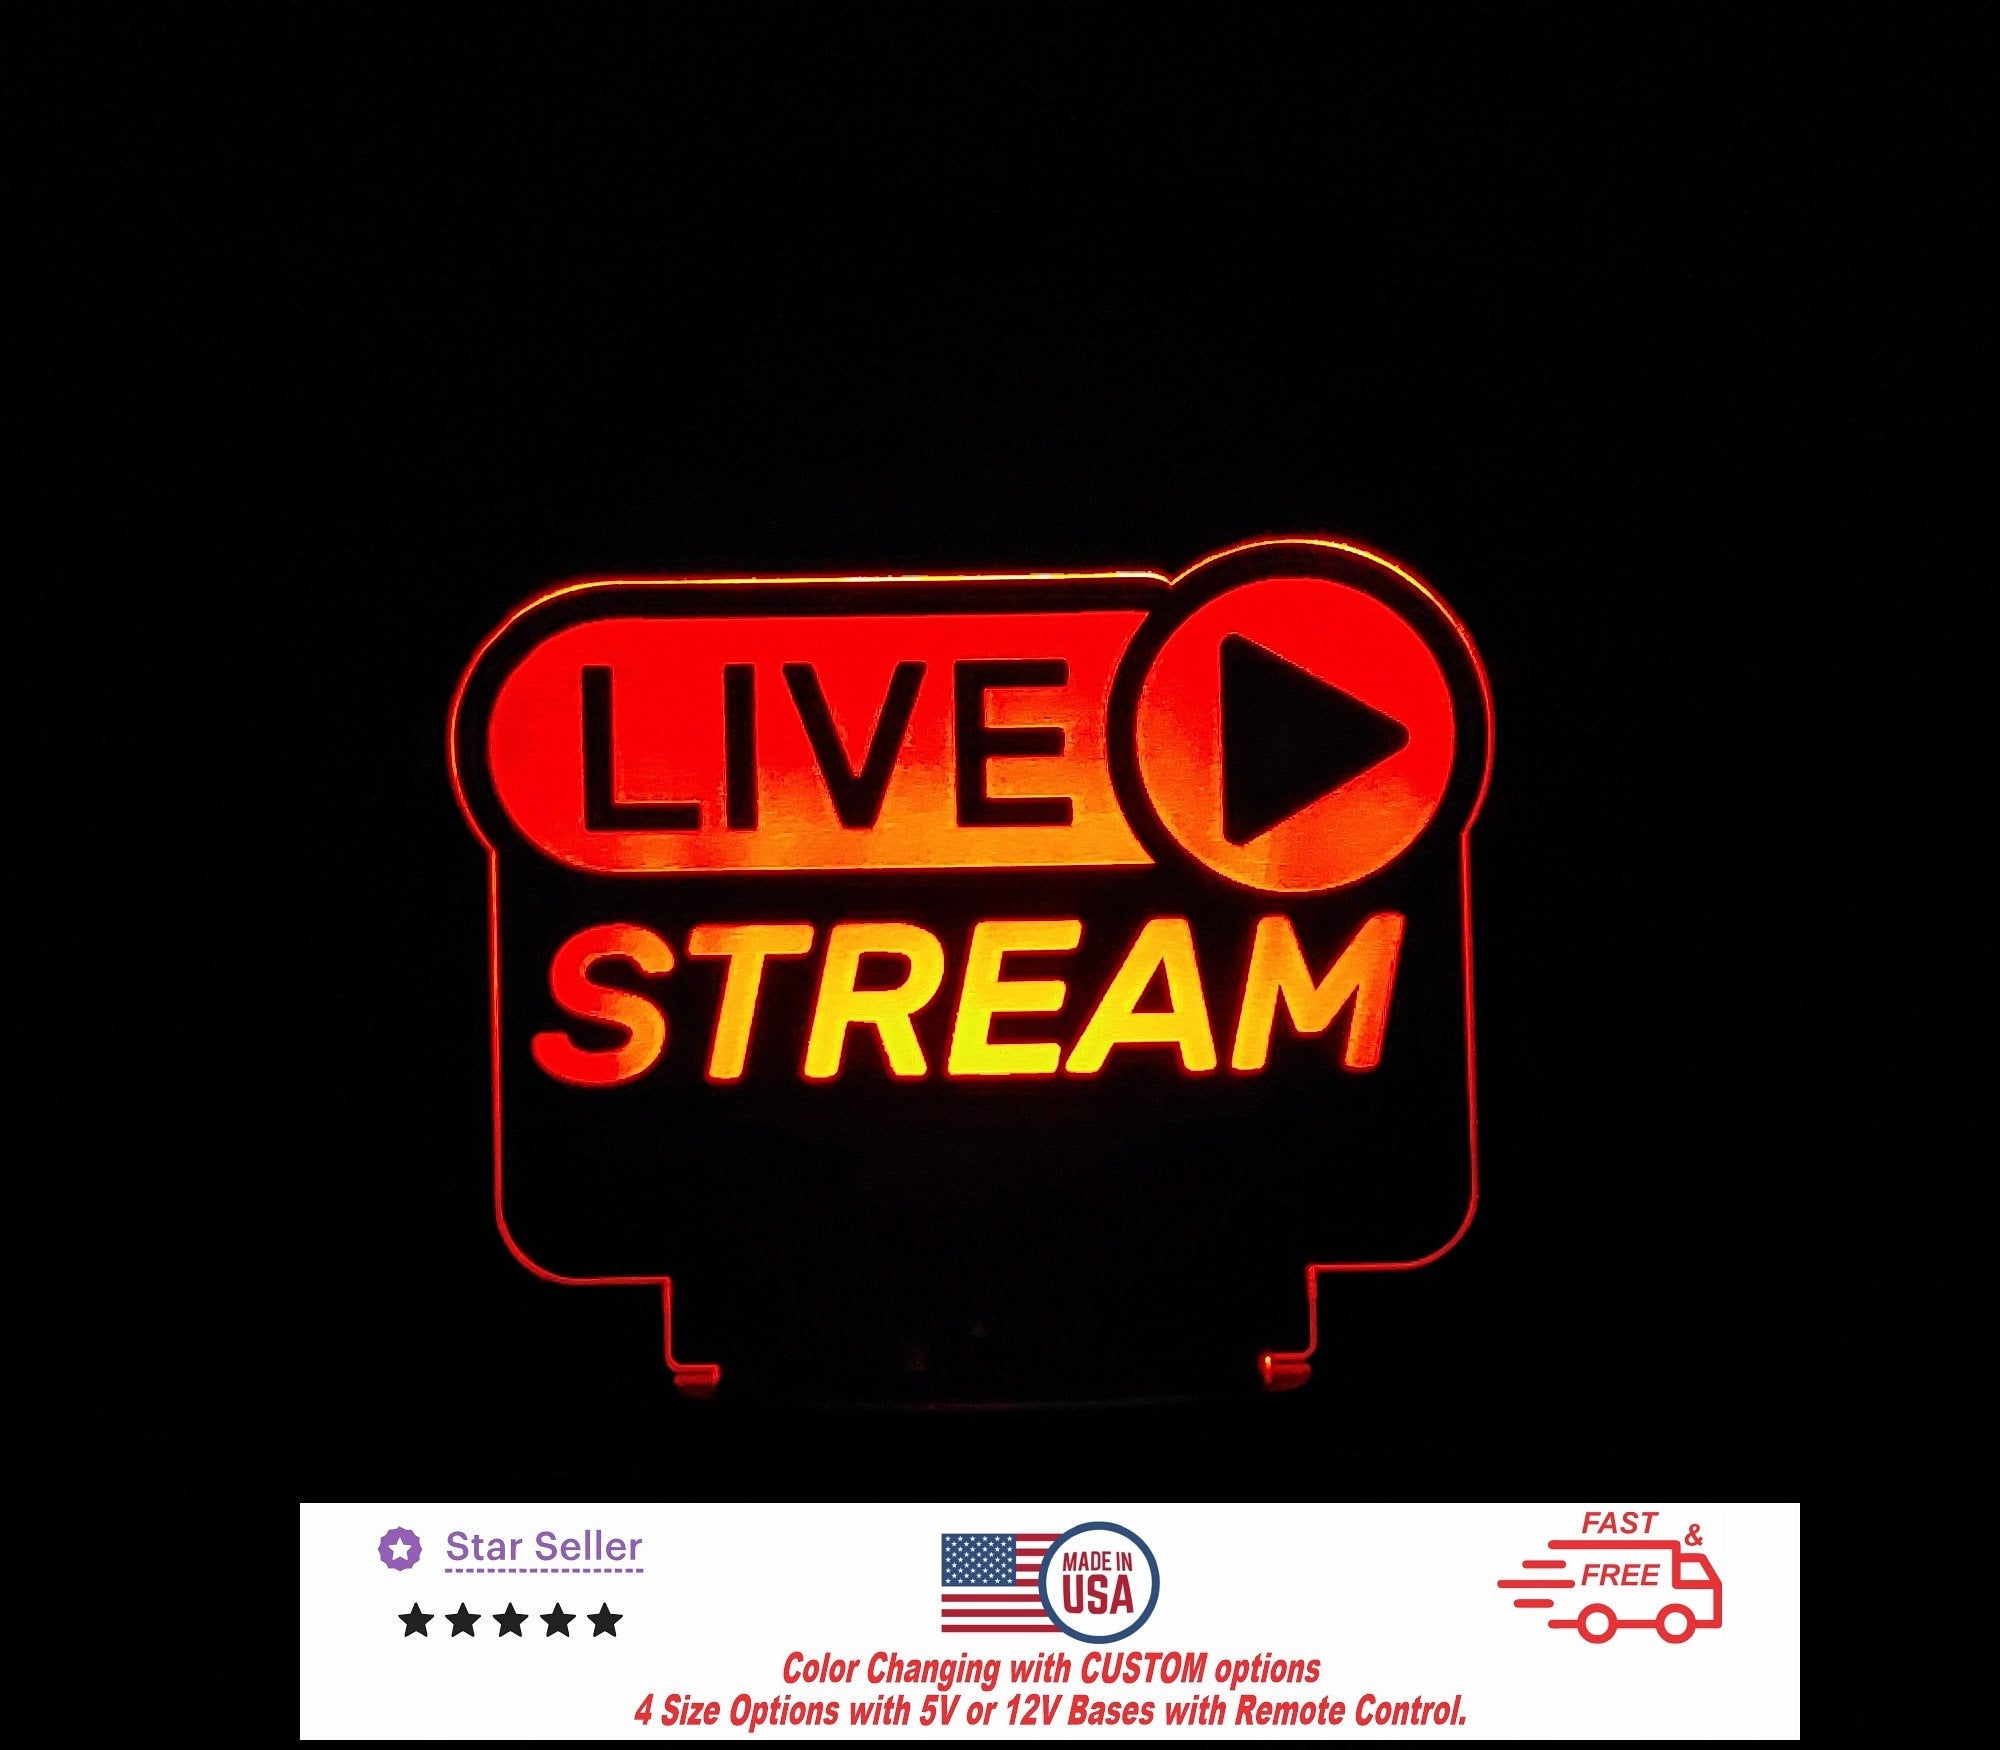 Live Stream Personalized LED Night Light - Neon sign, Room Decor, Recording Music, Streaming, Music Studio 4 sizes Free Shipping Made in USA